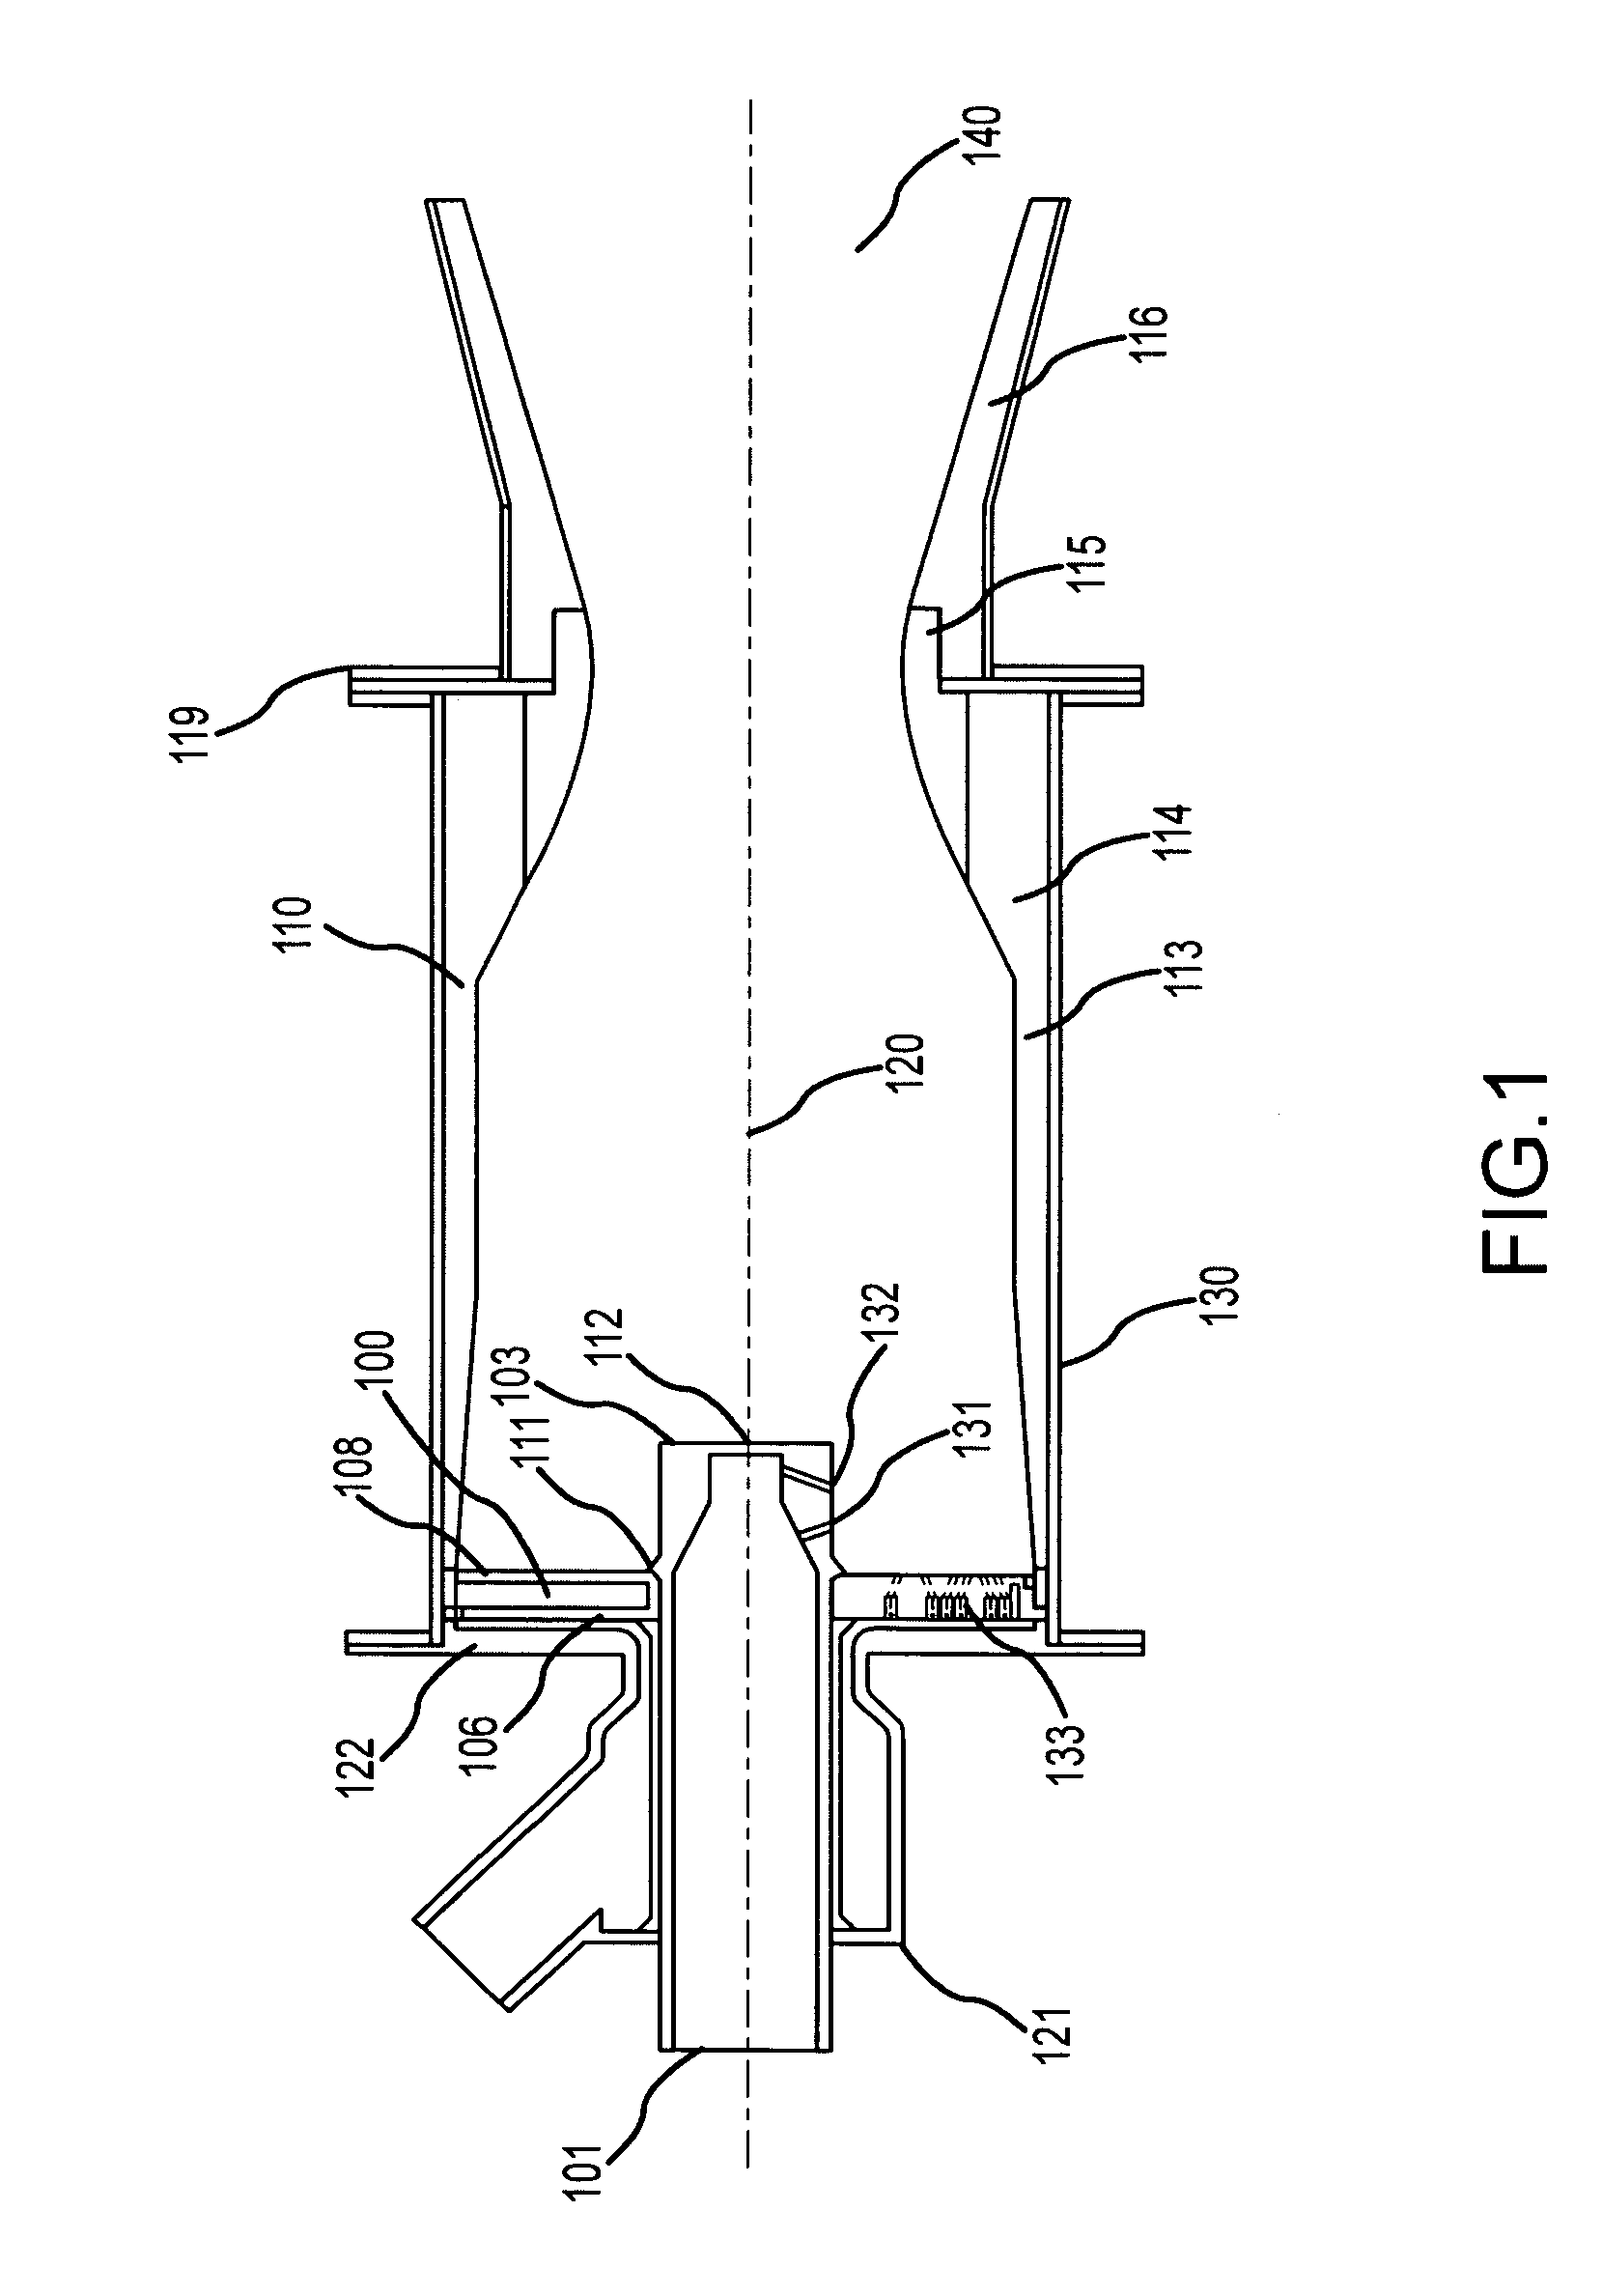 Liquid propellant rocket engine with pintle injector and acoustic dampening